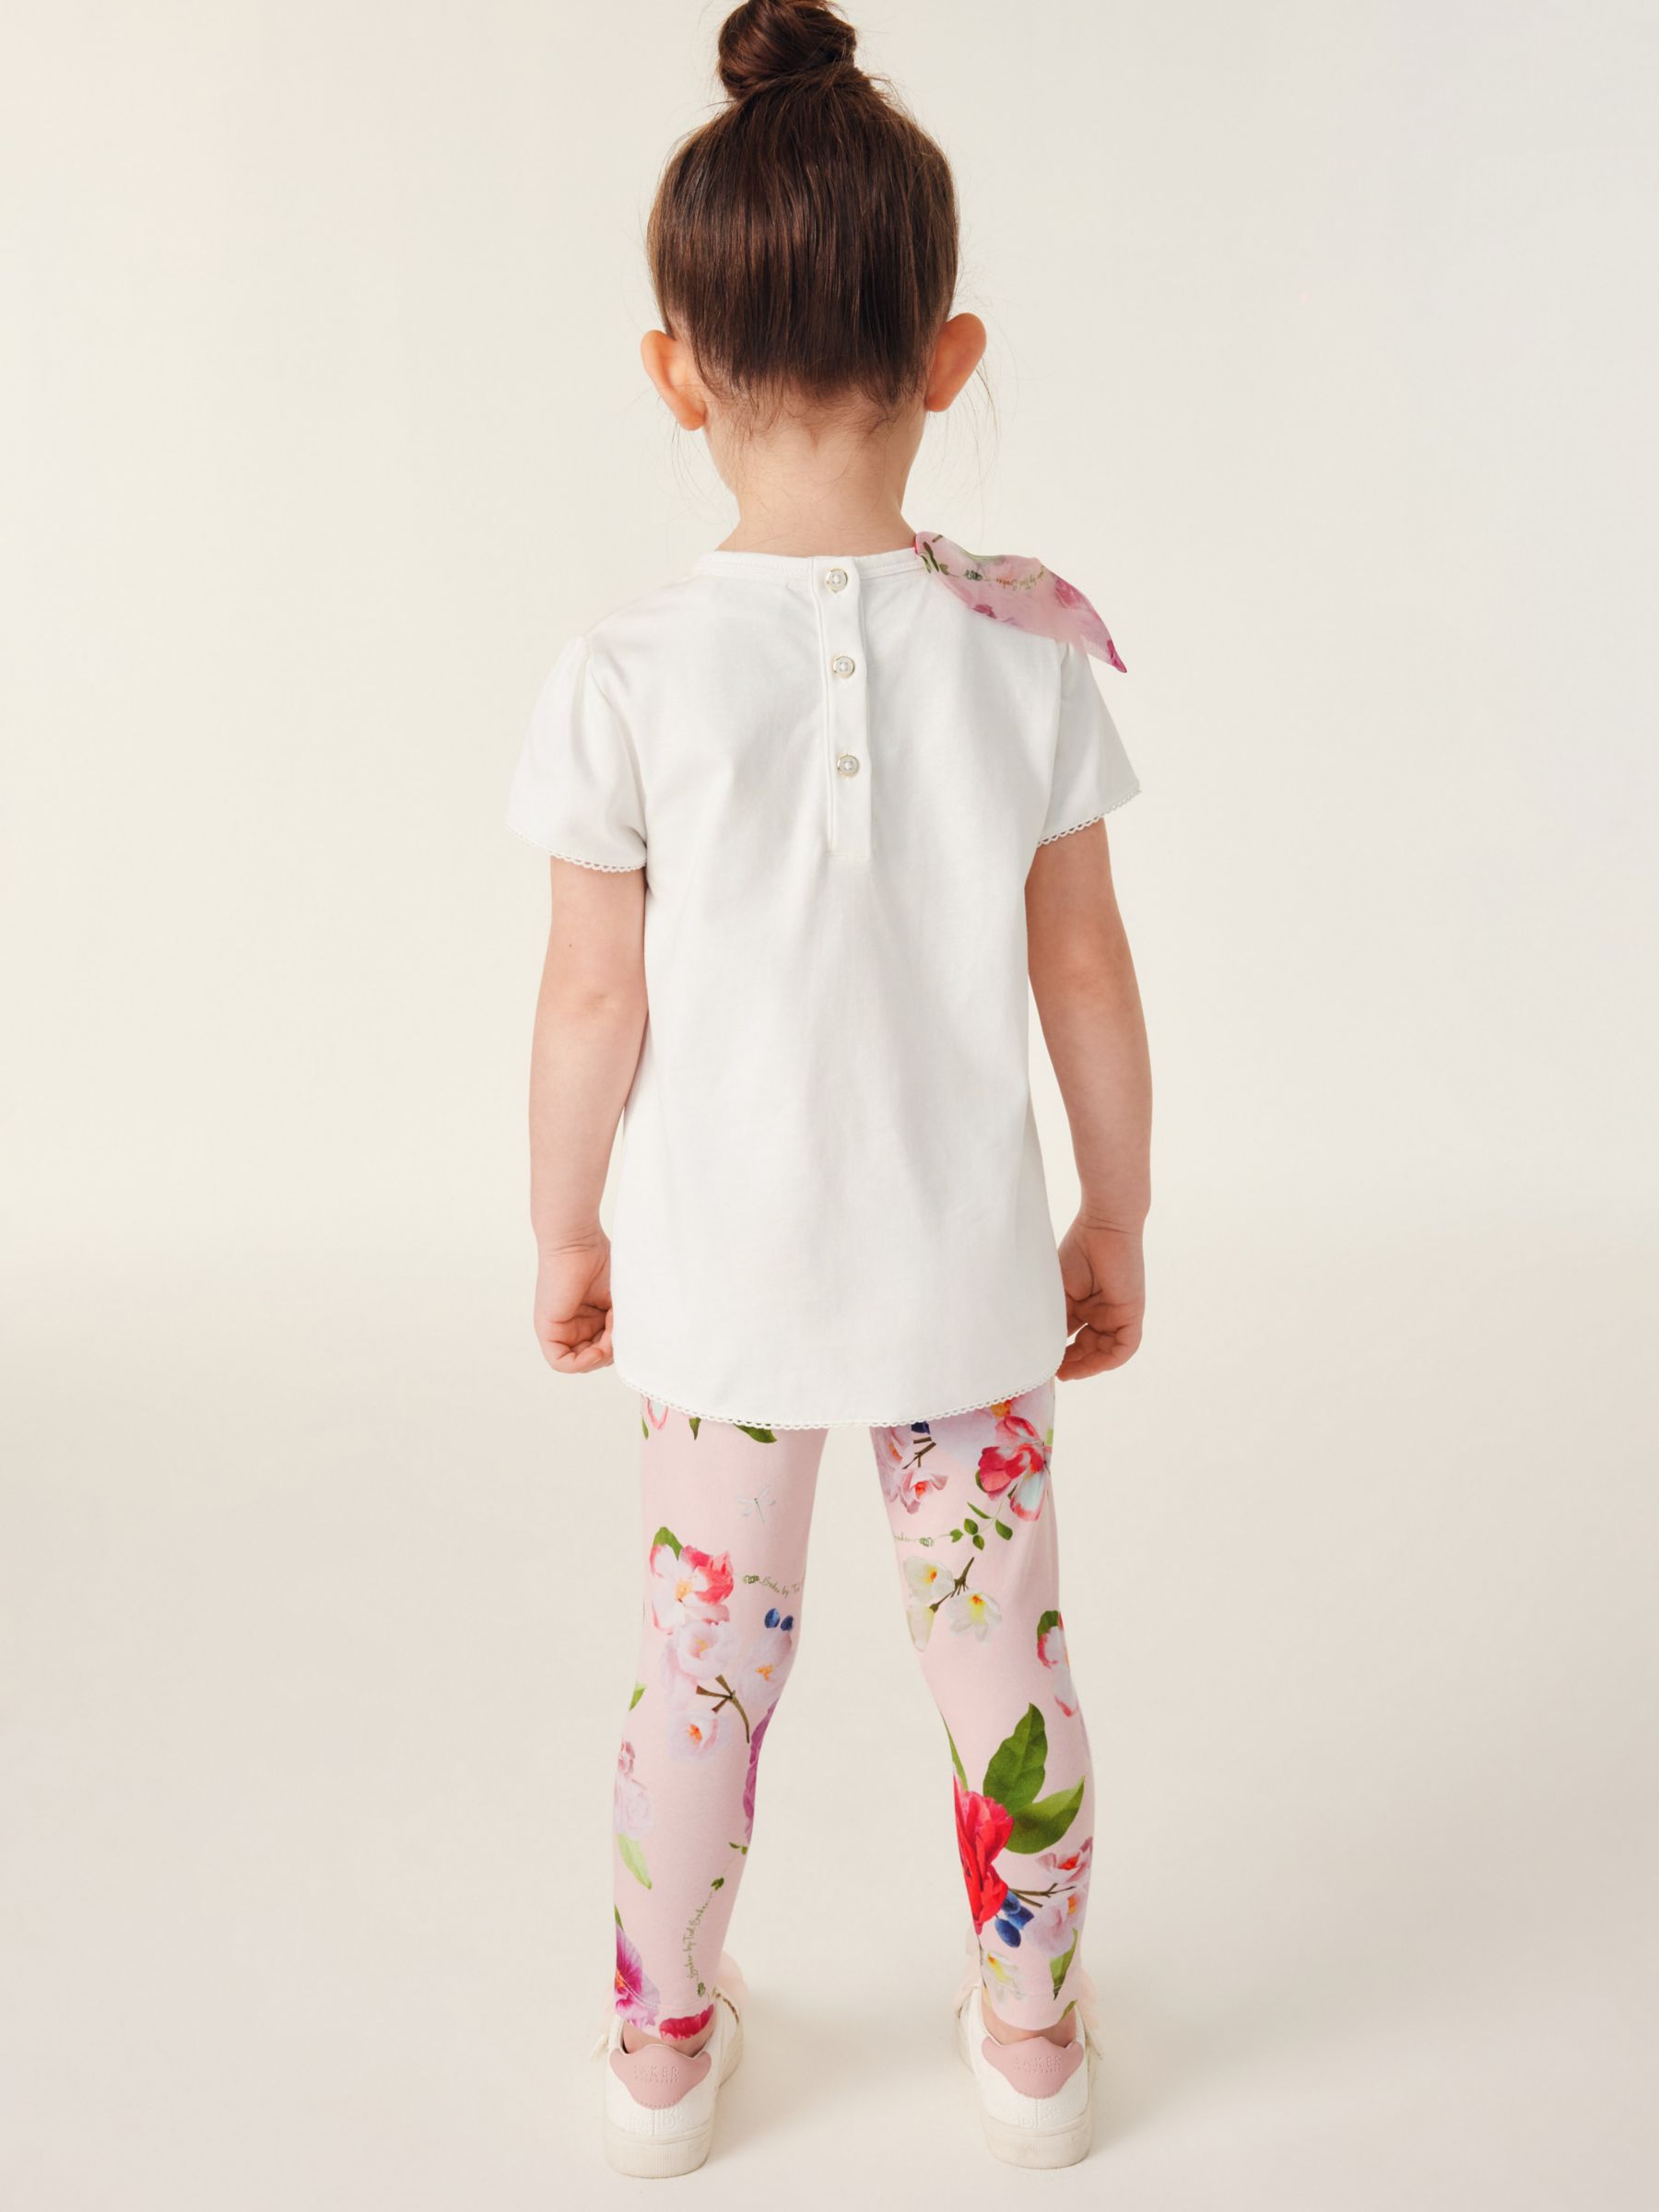 Ted Baker Baby Floral Bow T-Shirt & Leggings Set, Pink/Multi, 3-6 months